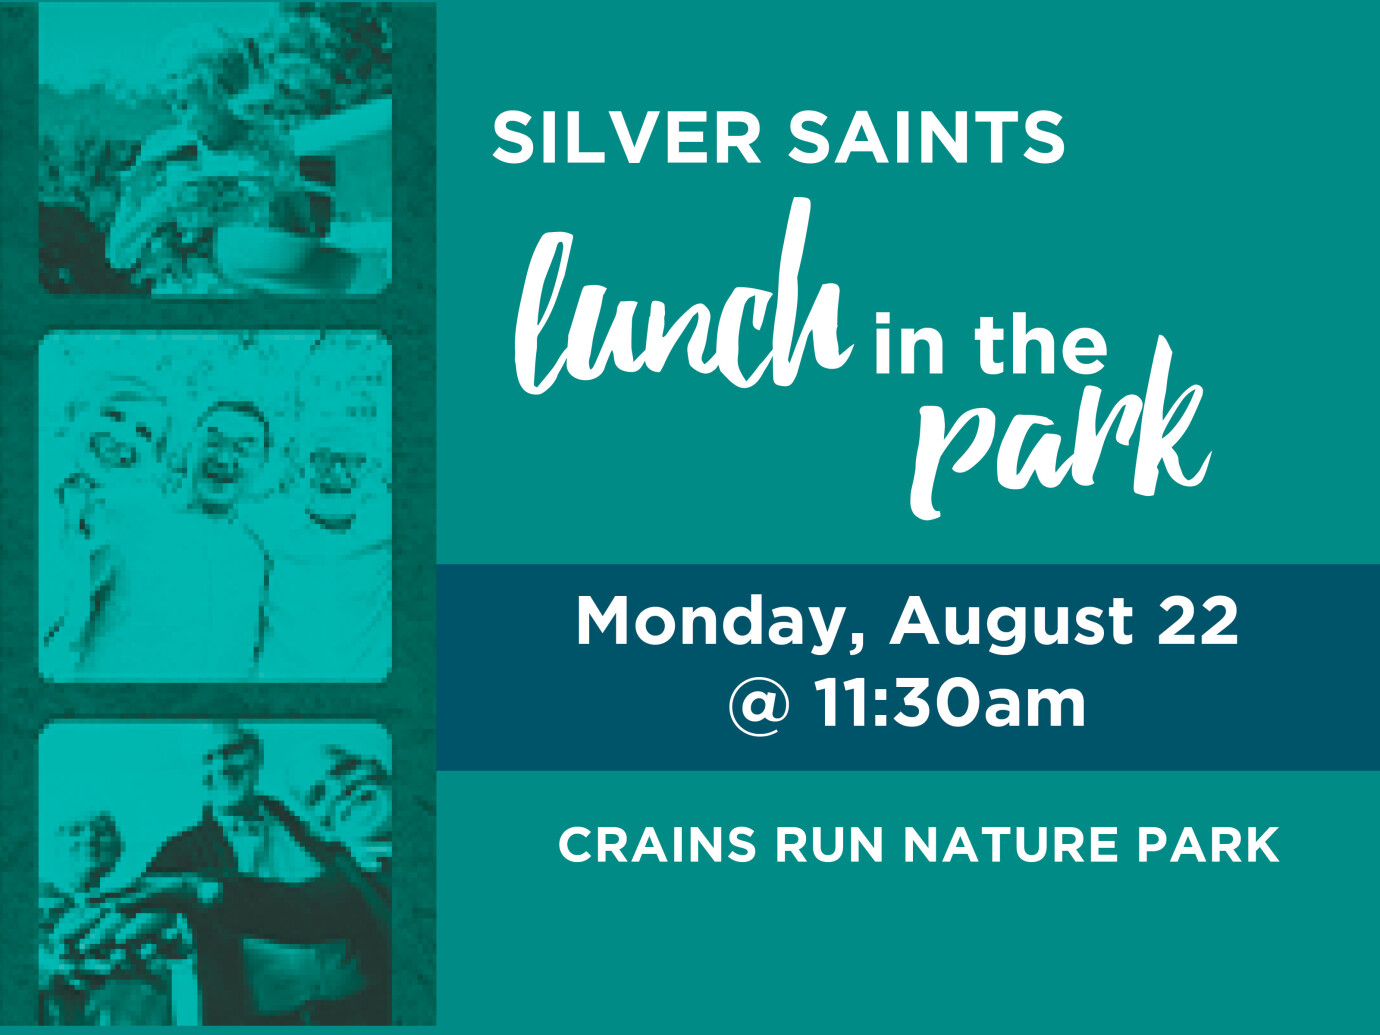 Silver Saints - BYO Lunch to the Park!